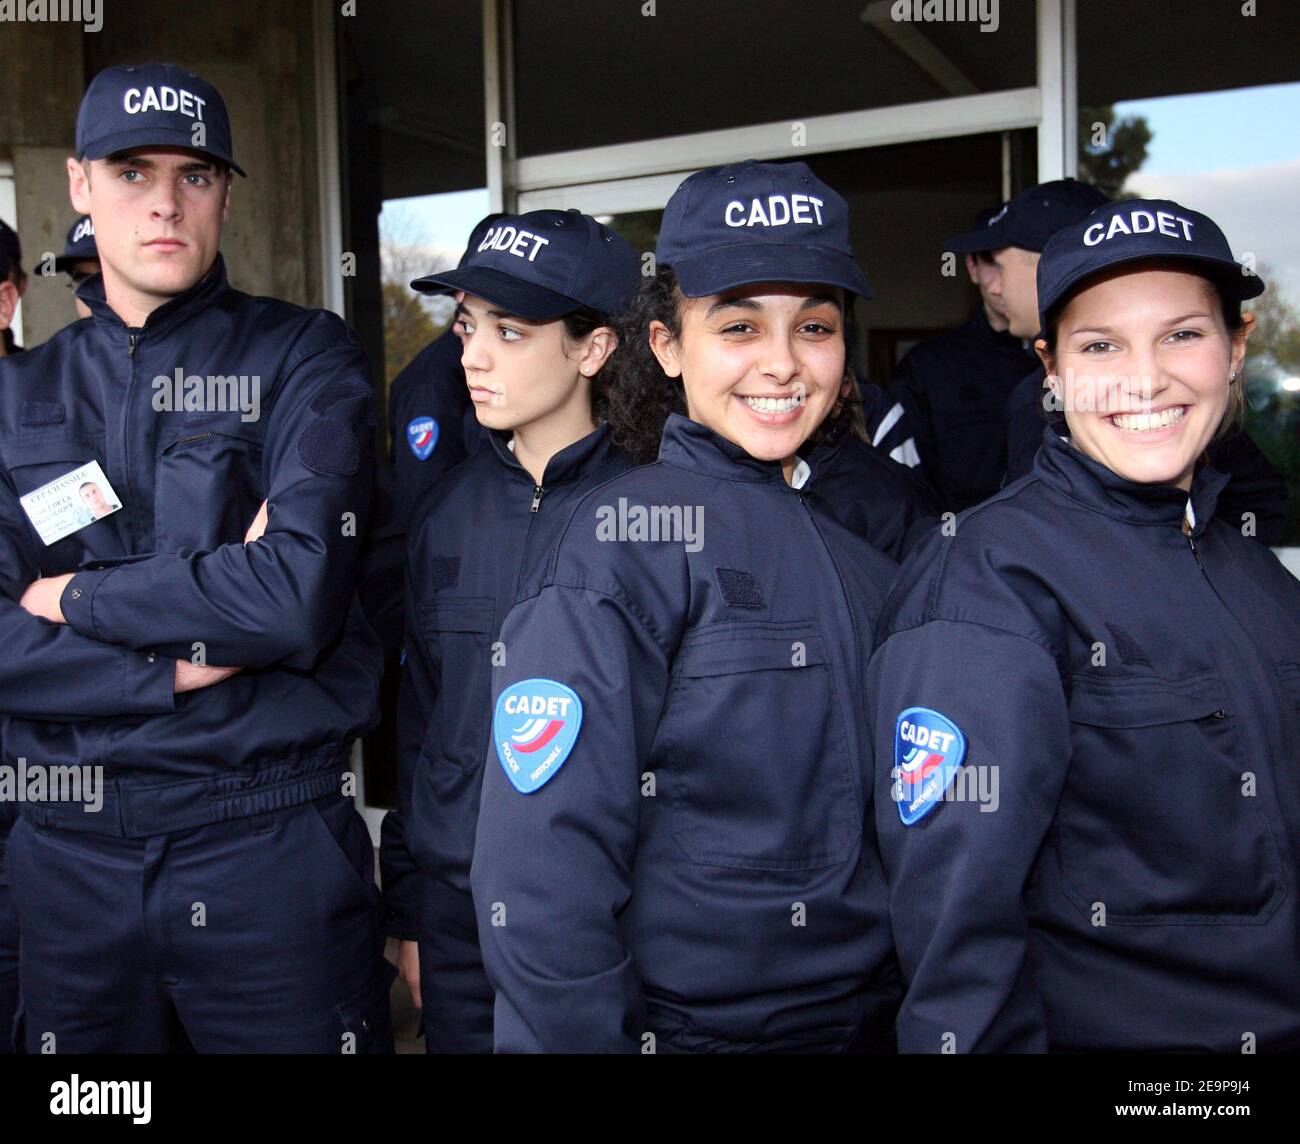 Trainees are seen during the visit Catherine Vautrin, Social cohesion  minister, in a National police's training centre in Chassieu (near Lyon),  France, on November 15, 2006. This special school train young people